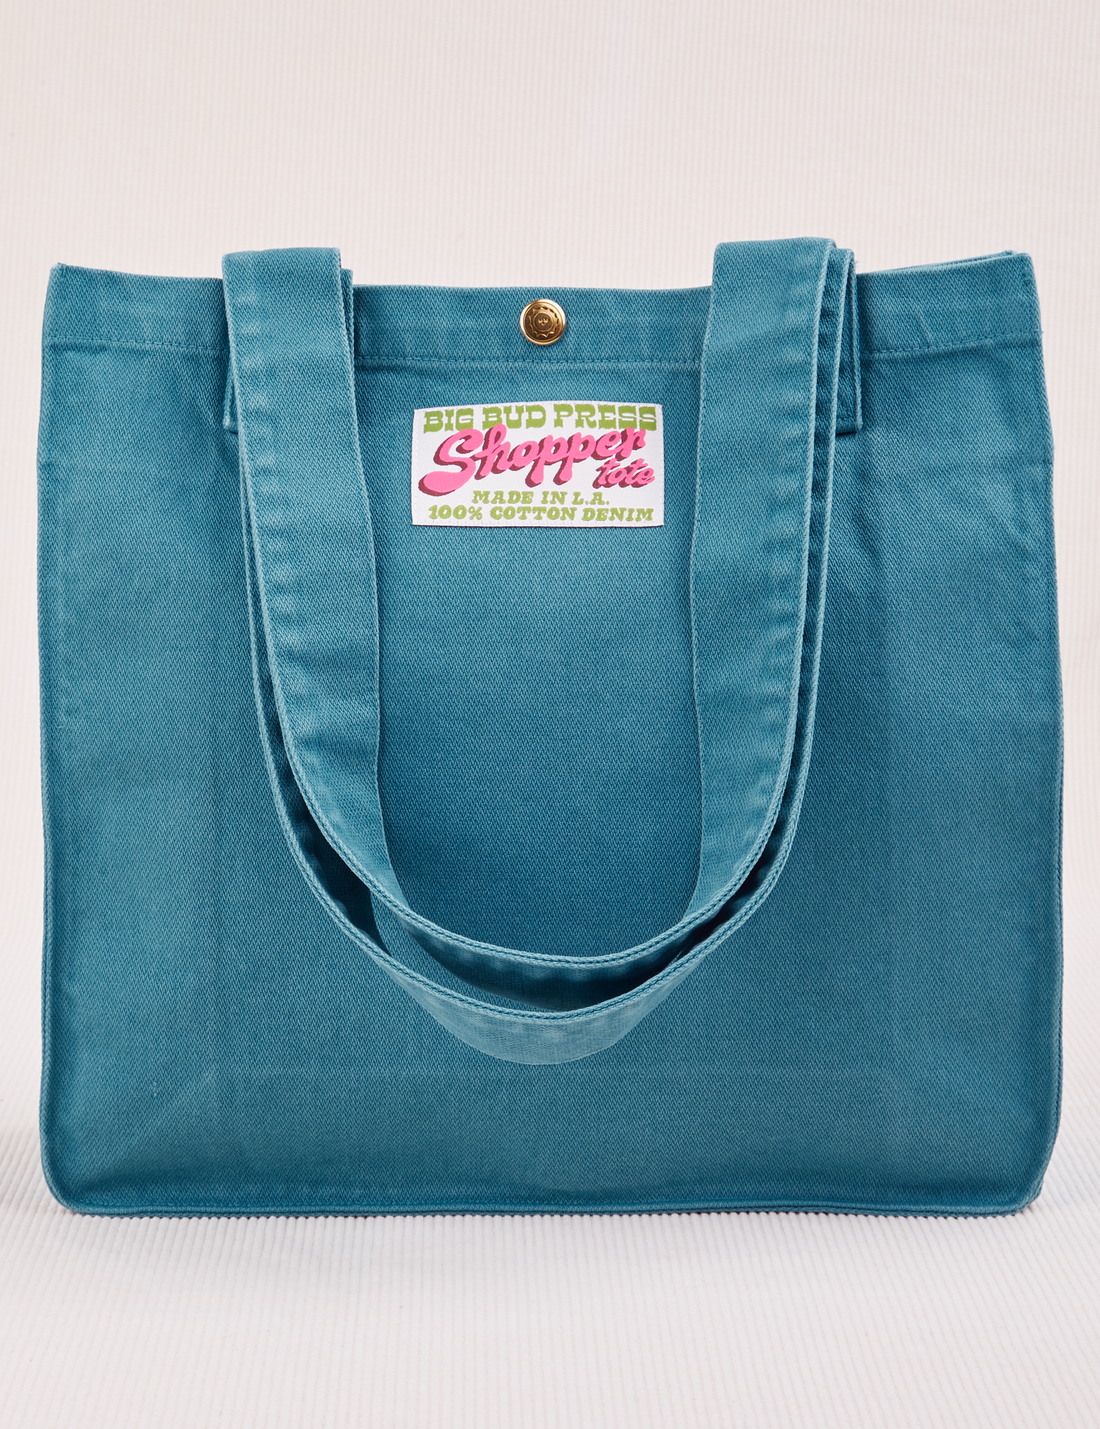 Shopper Tote Bag in Marine Blue with straps hanging down front of bag